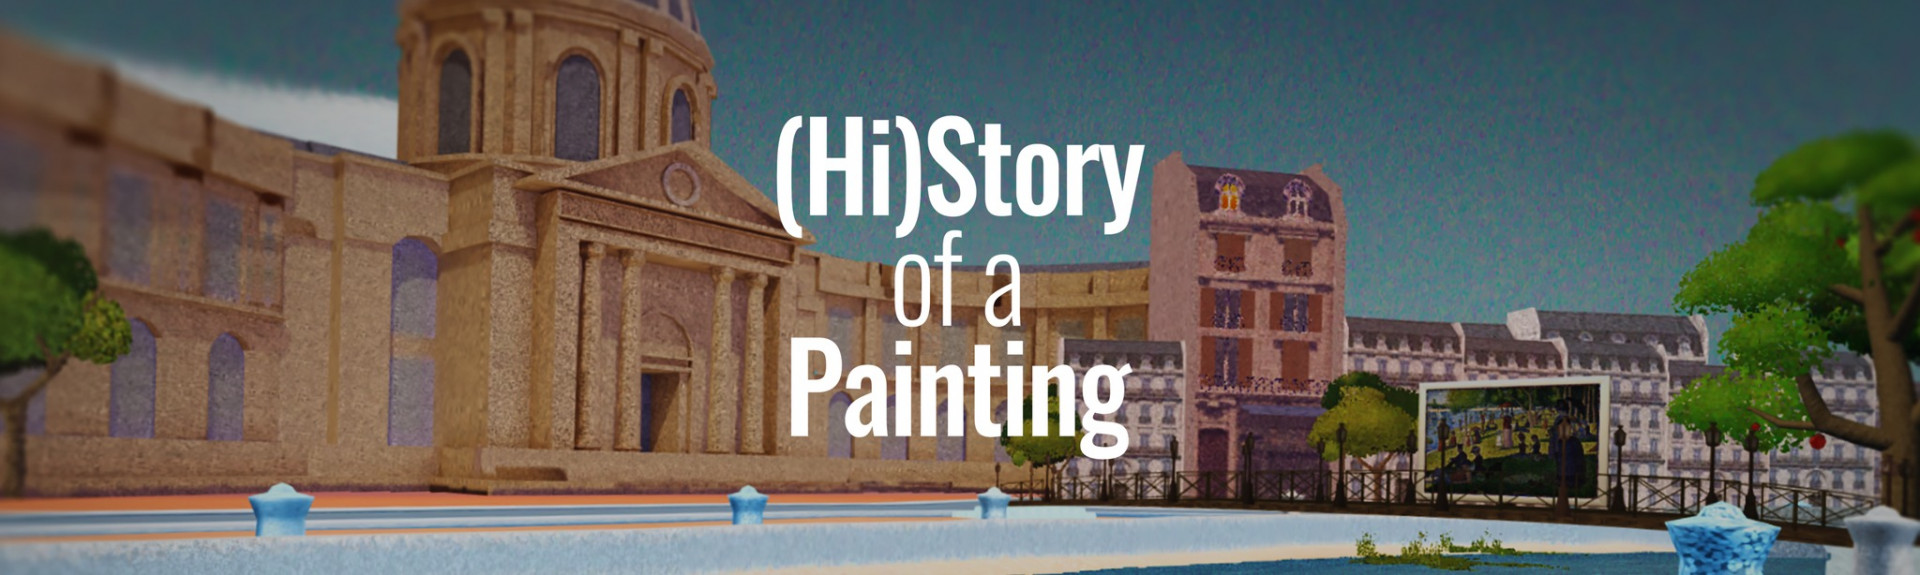 History Of A Painting - 